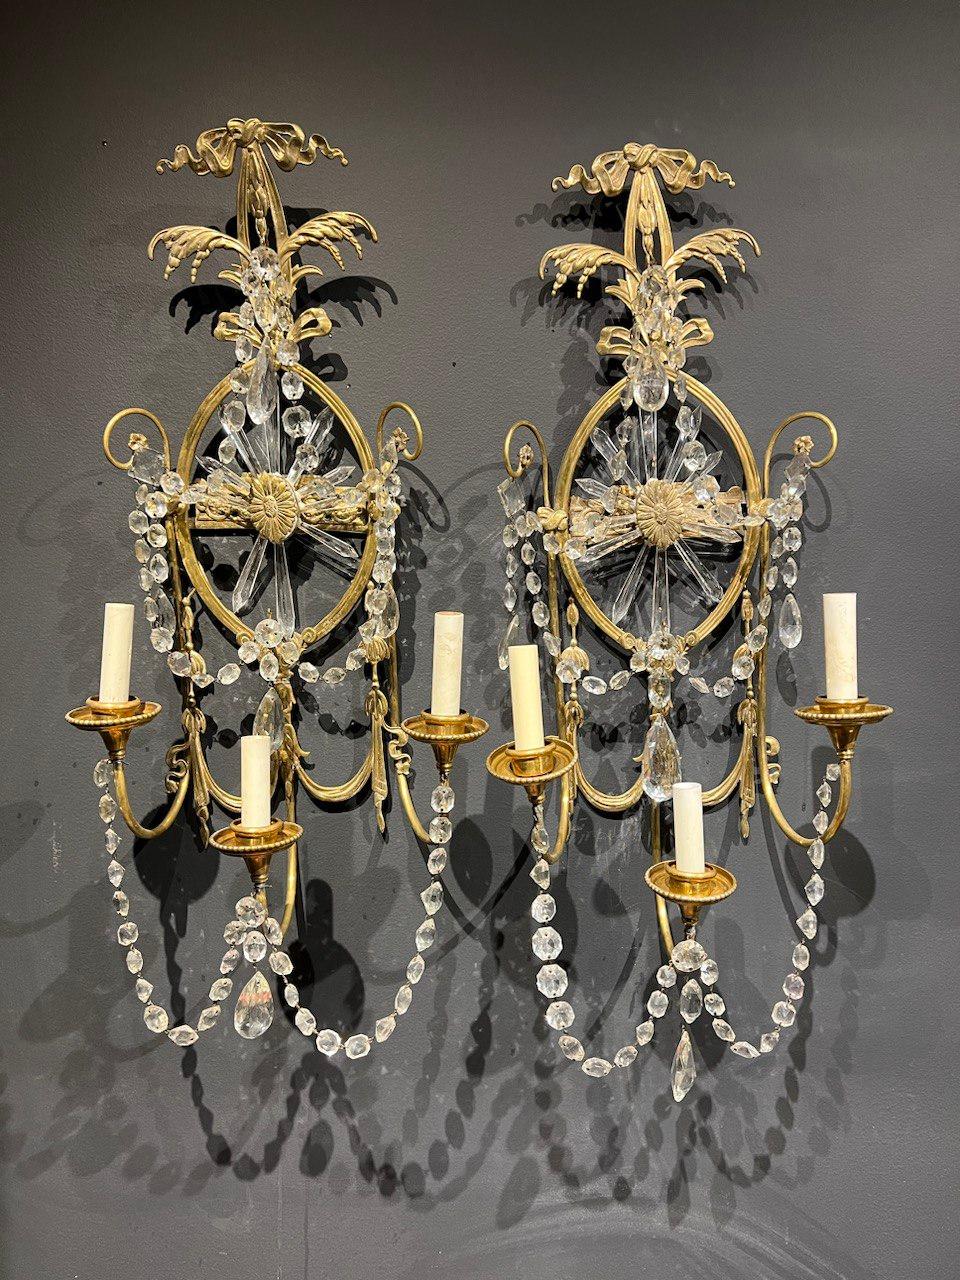 1920s Caldwell Large Sunburst Crystal Sconces with Three Lights In Good Condition For Sale In New York, NY